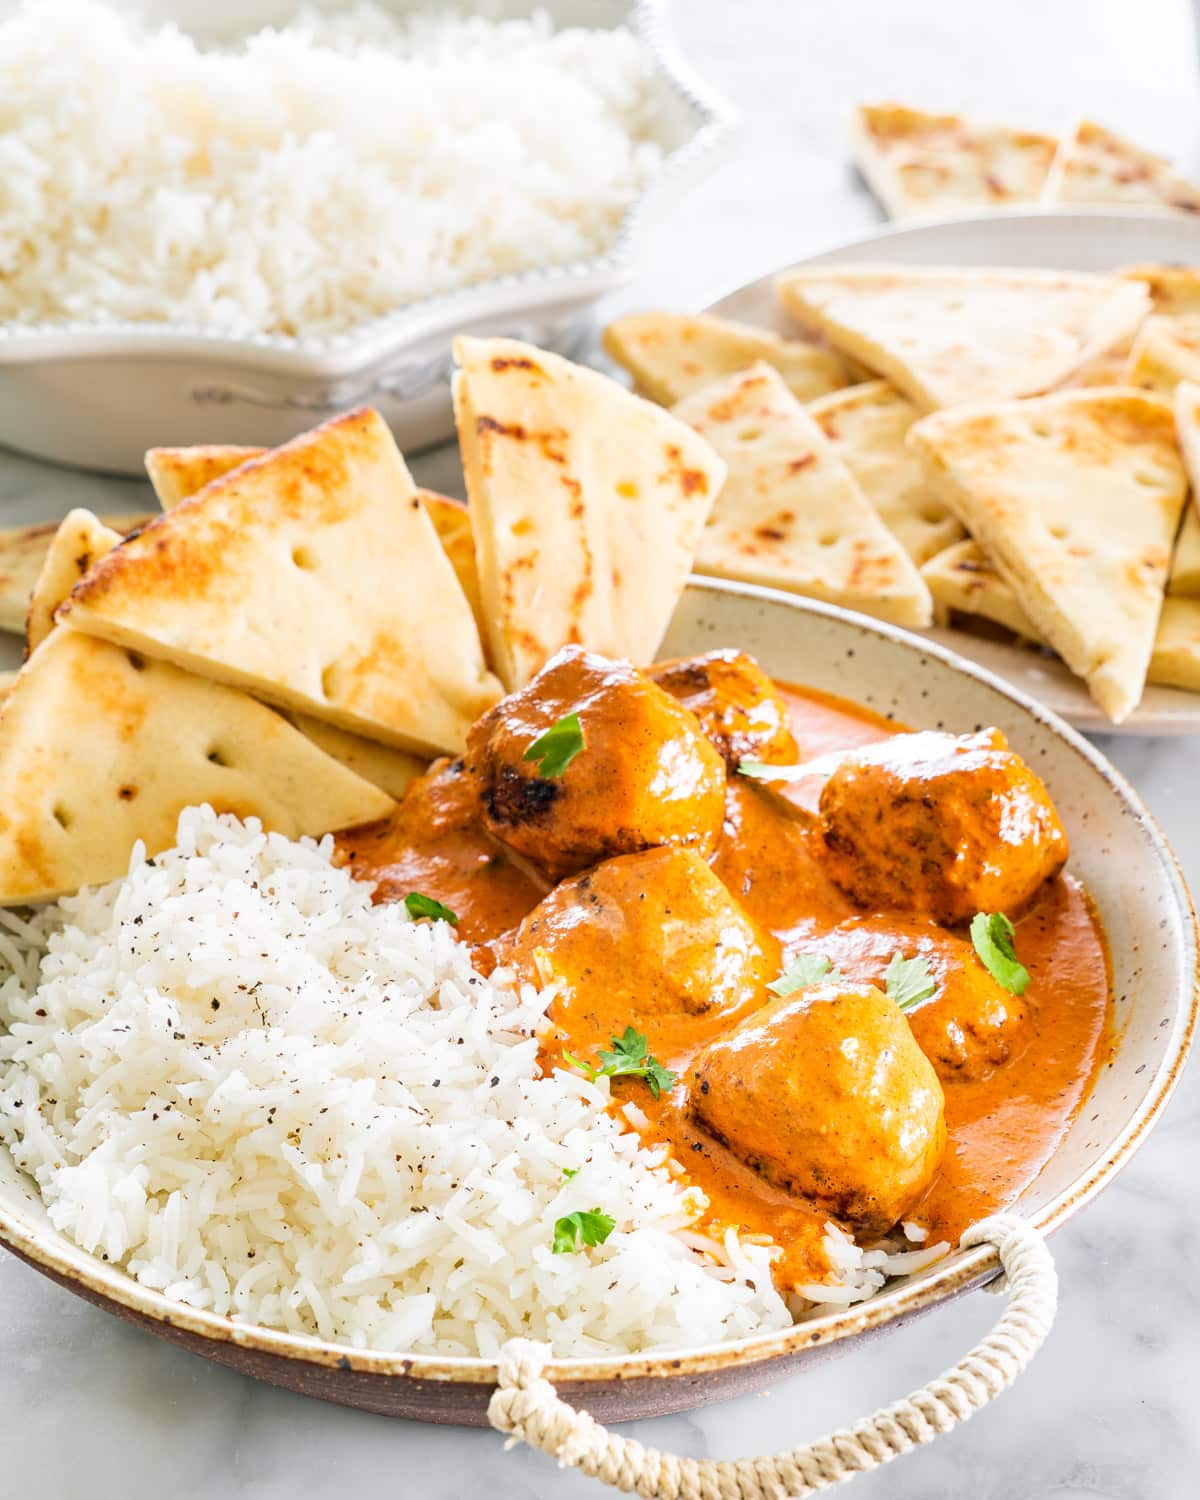 butter chicken meatballs with a side of rice in a bowl with naan slices and garnished with cilantro